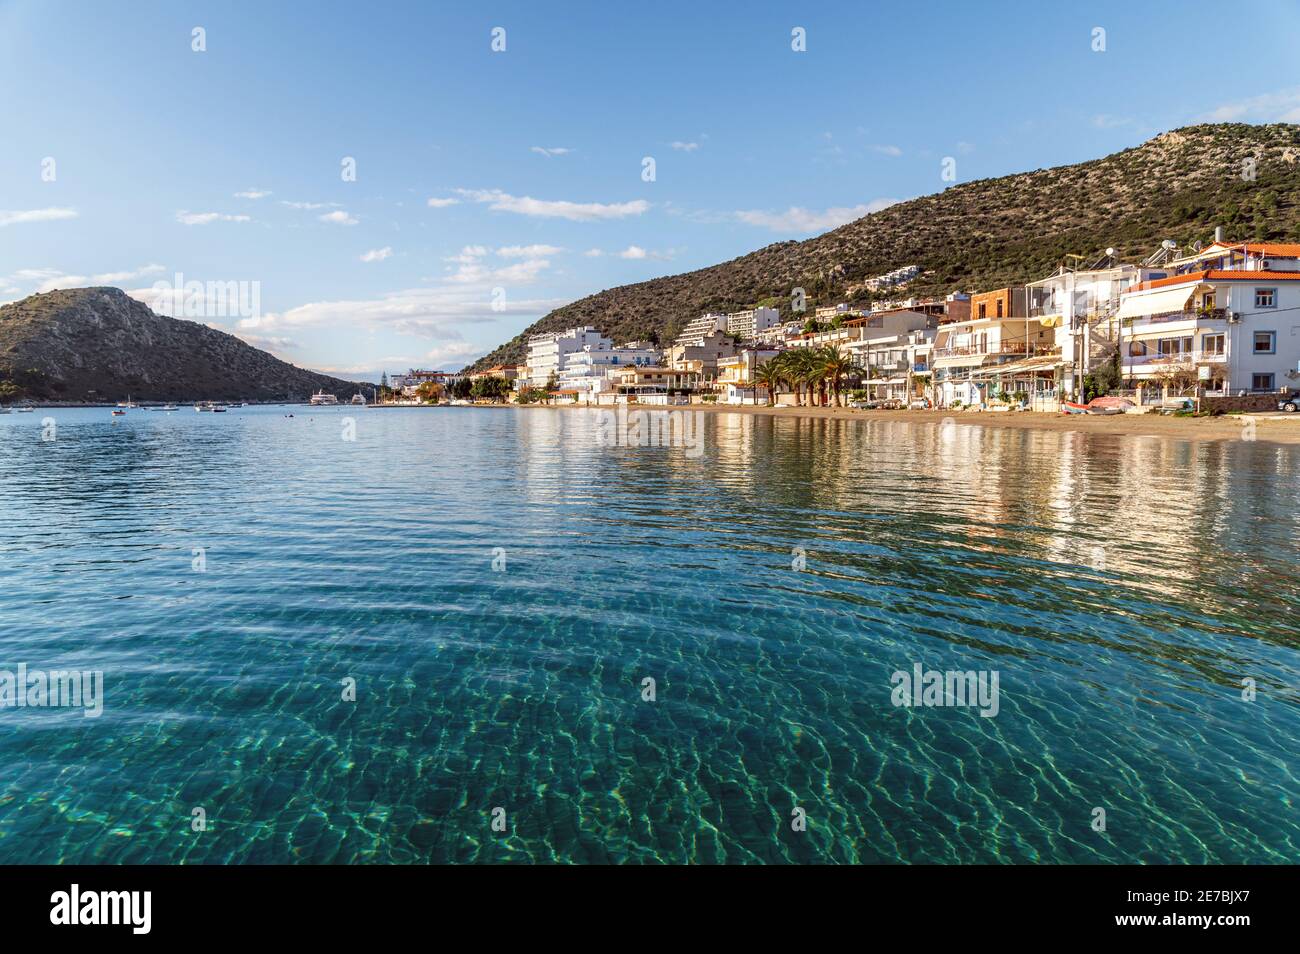 Seaside resort Tolo, Greece early in the morning Stock Photo